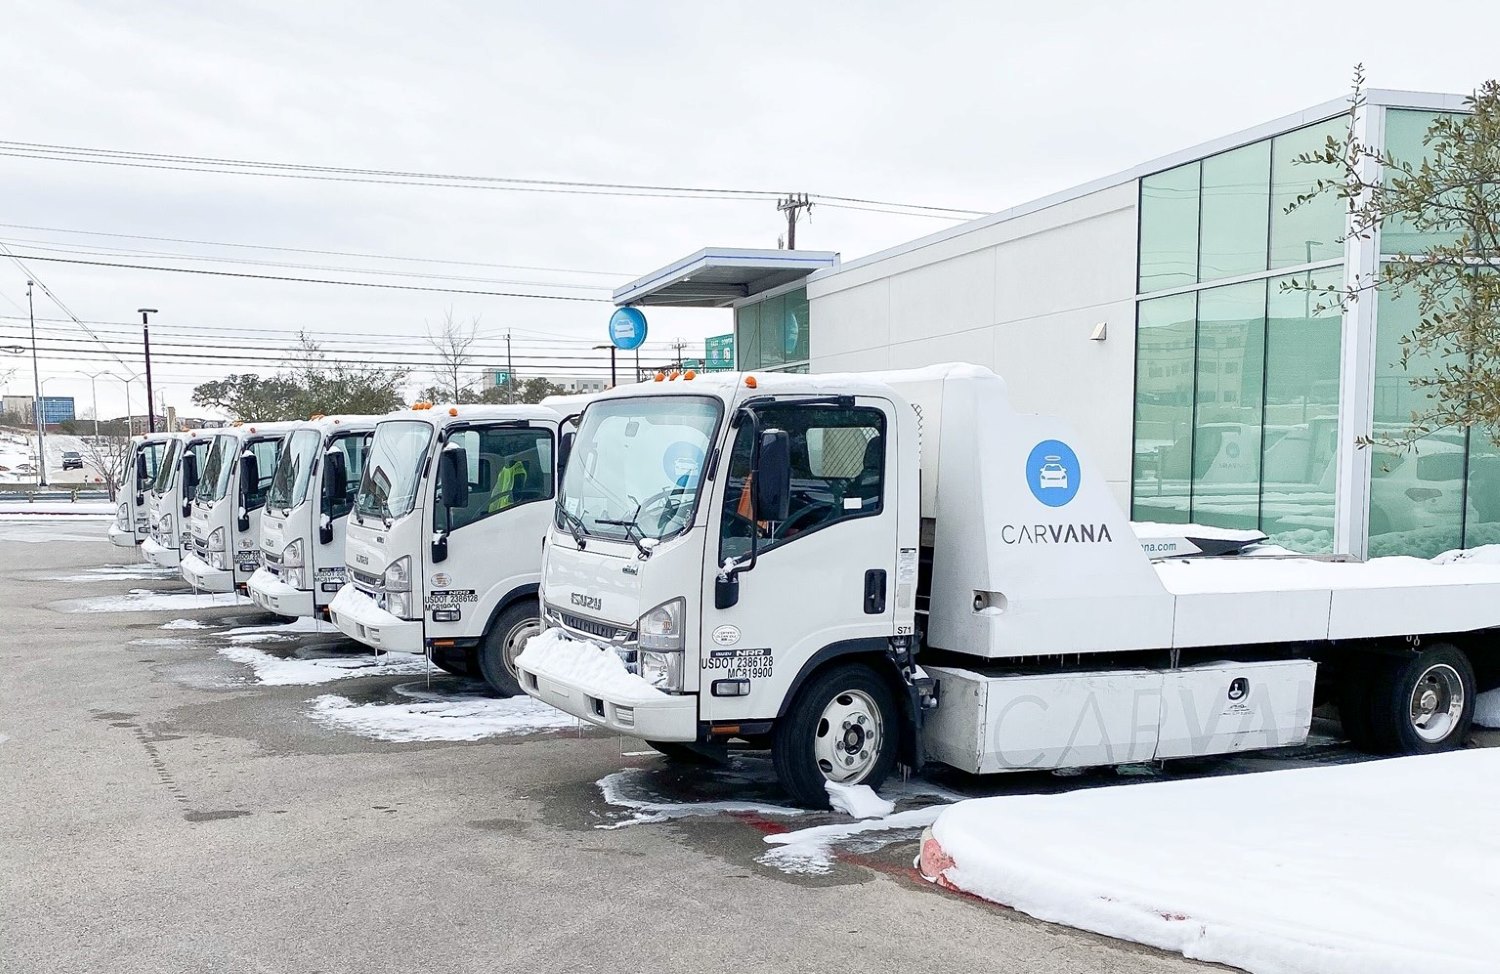 Carvana truck at a dealership location